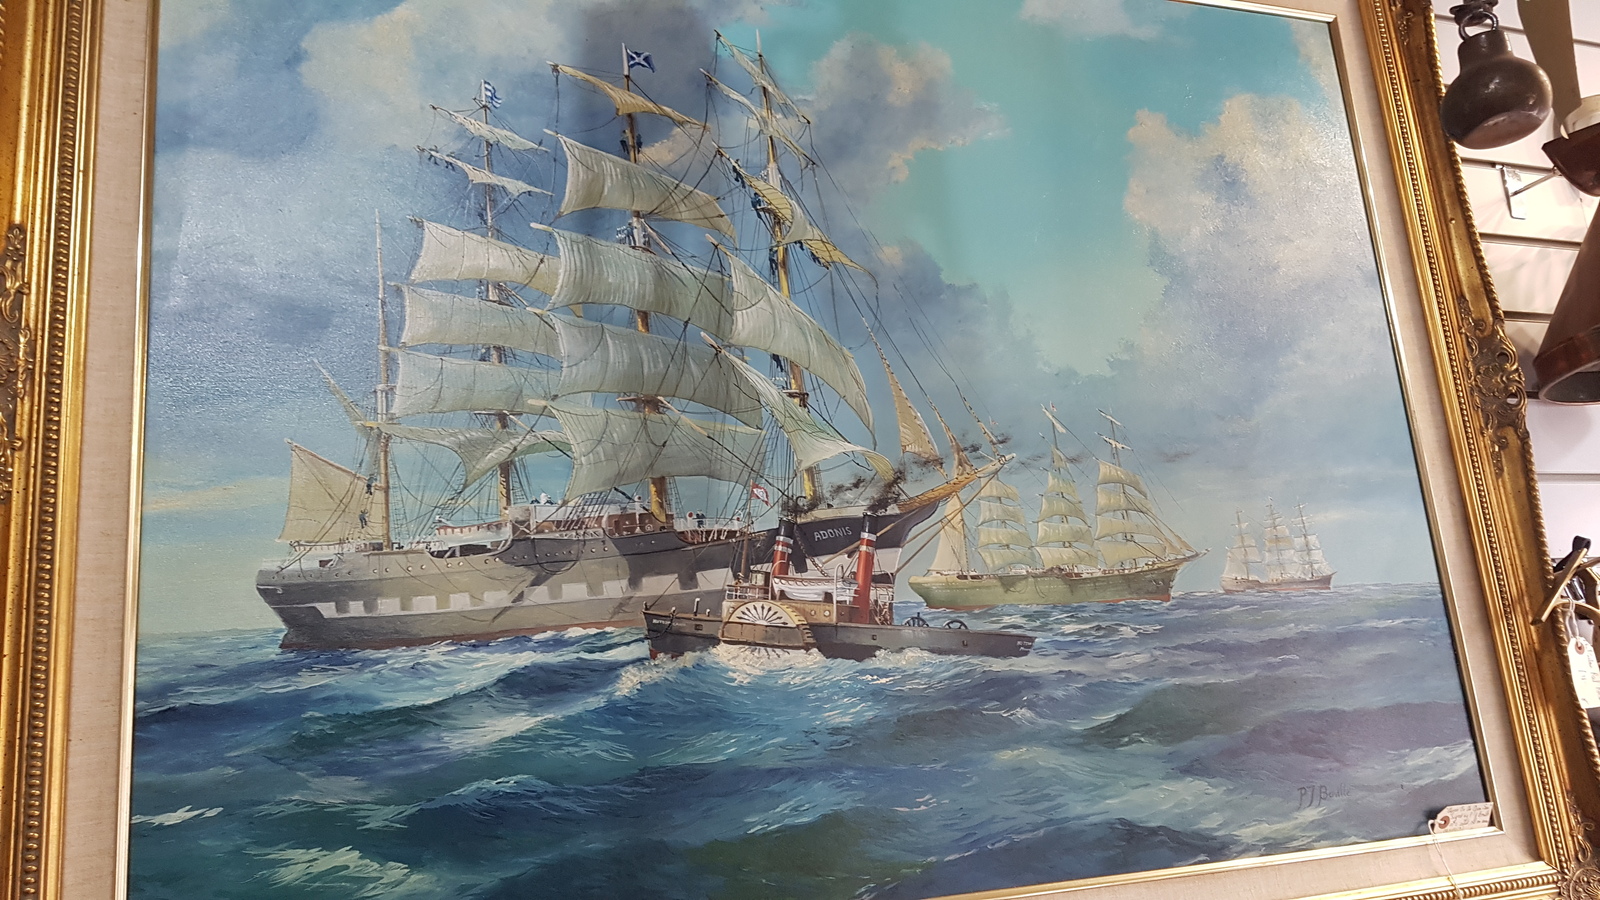 20th c. Clippers On the Open Sea, signed by P J Boville